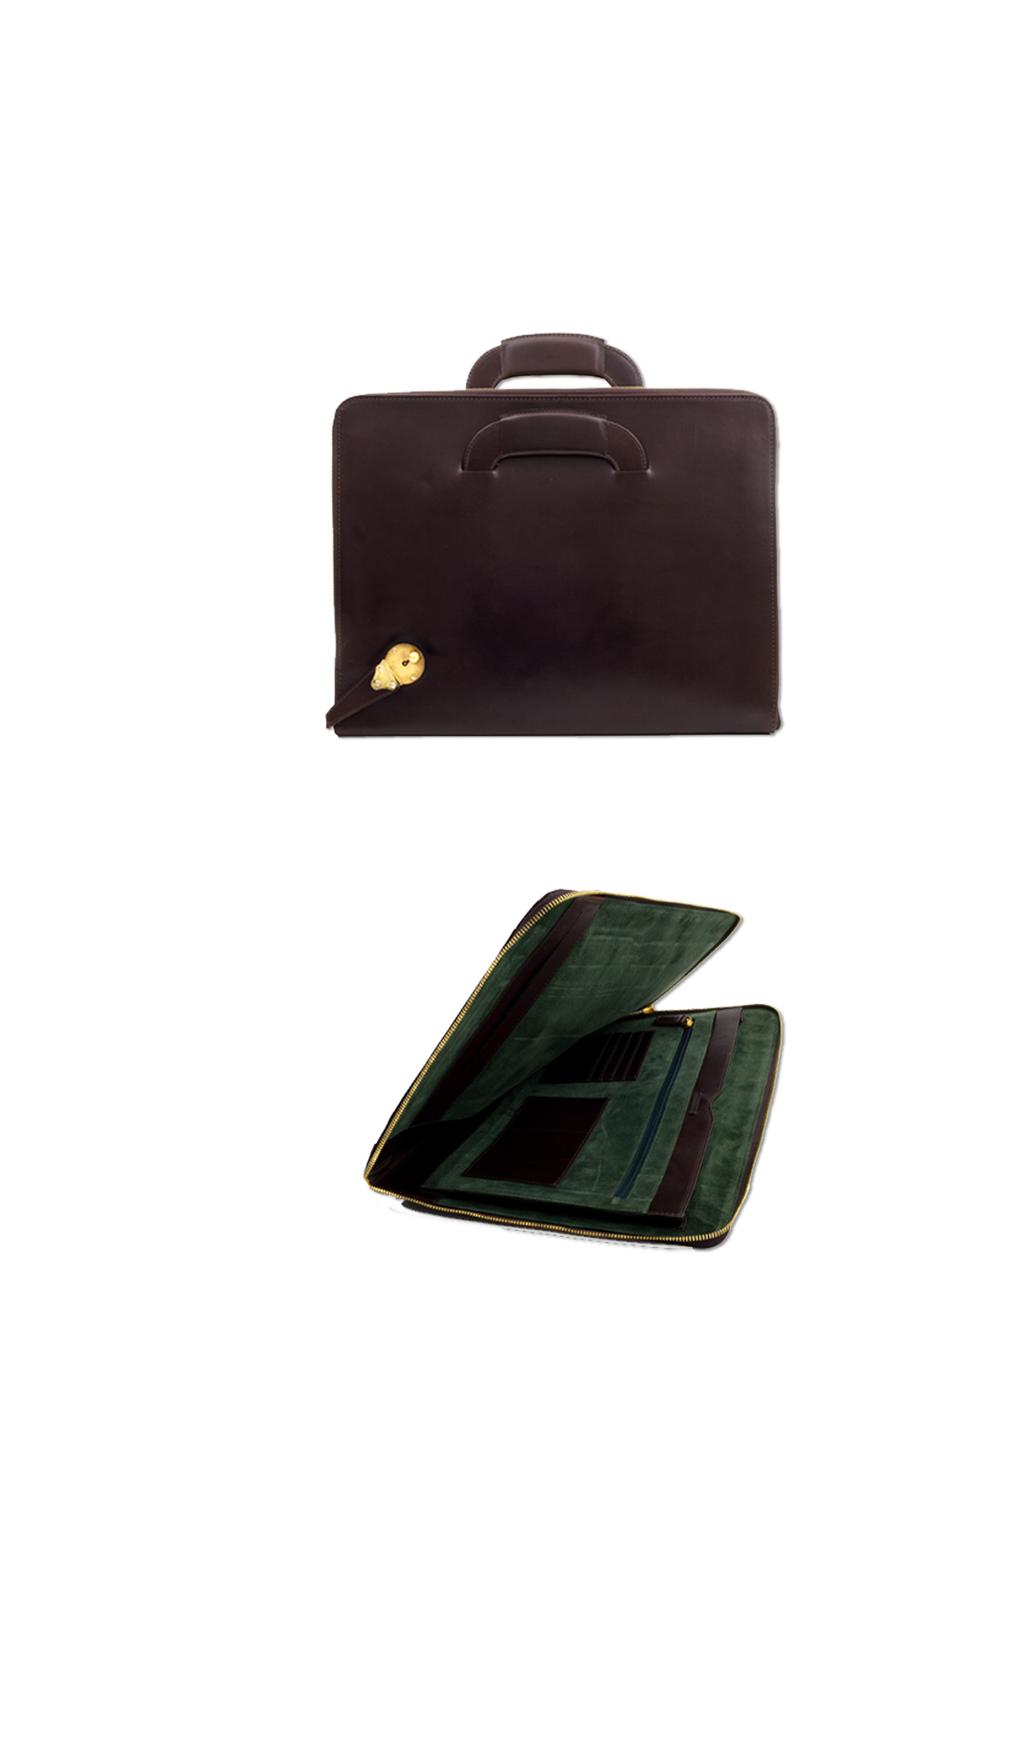 PORTFOLIO WITH HANDLES - Travel and It has discreet retractable handles and a